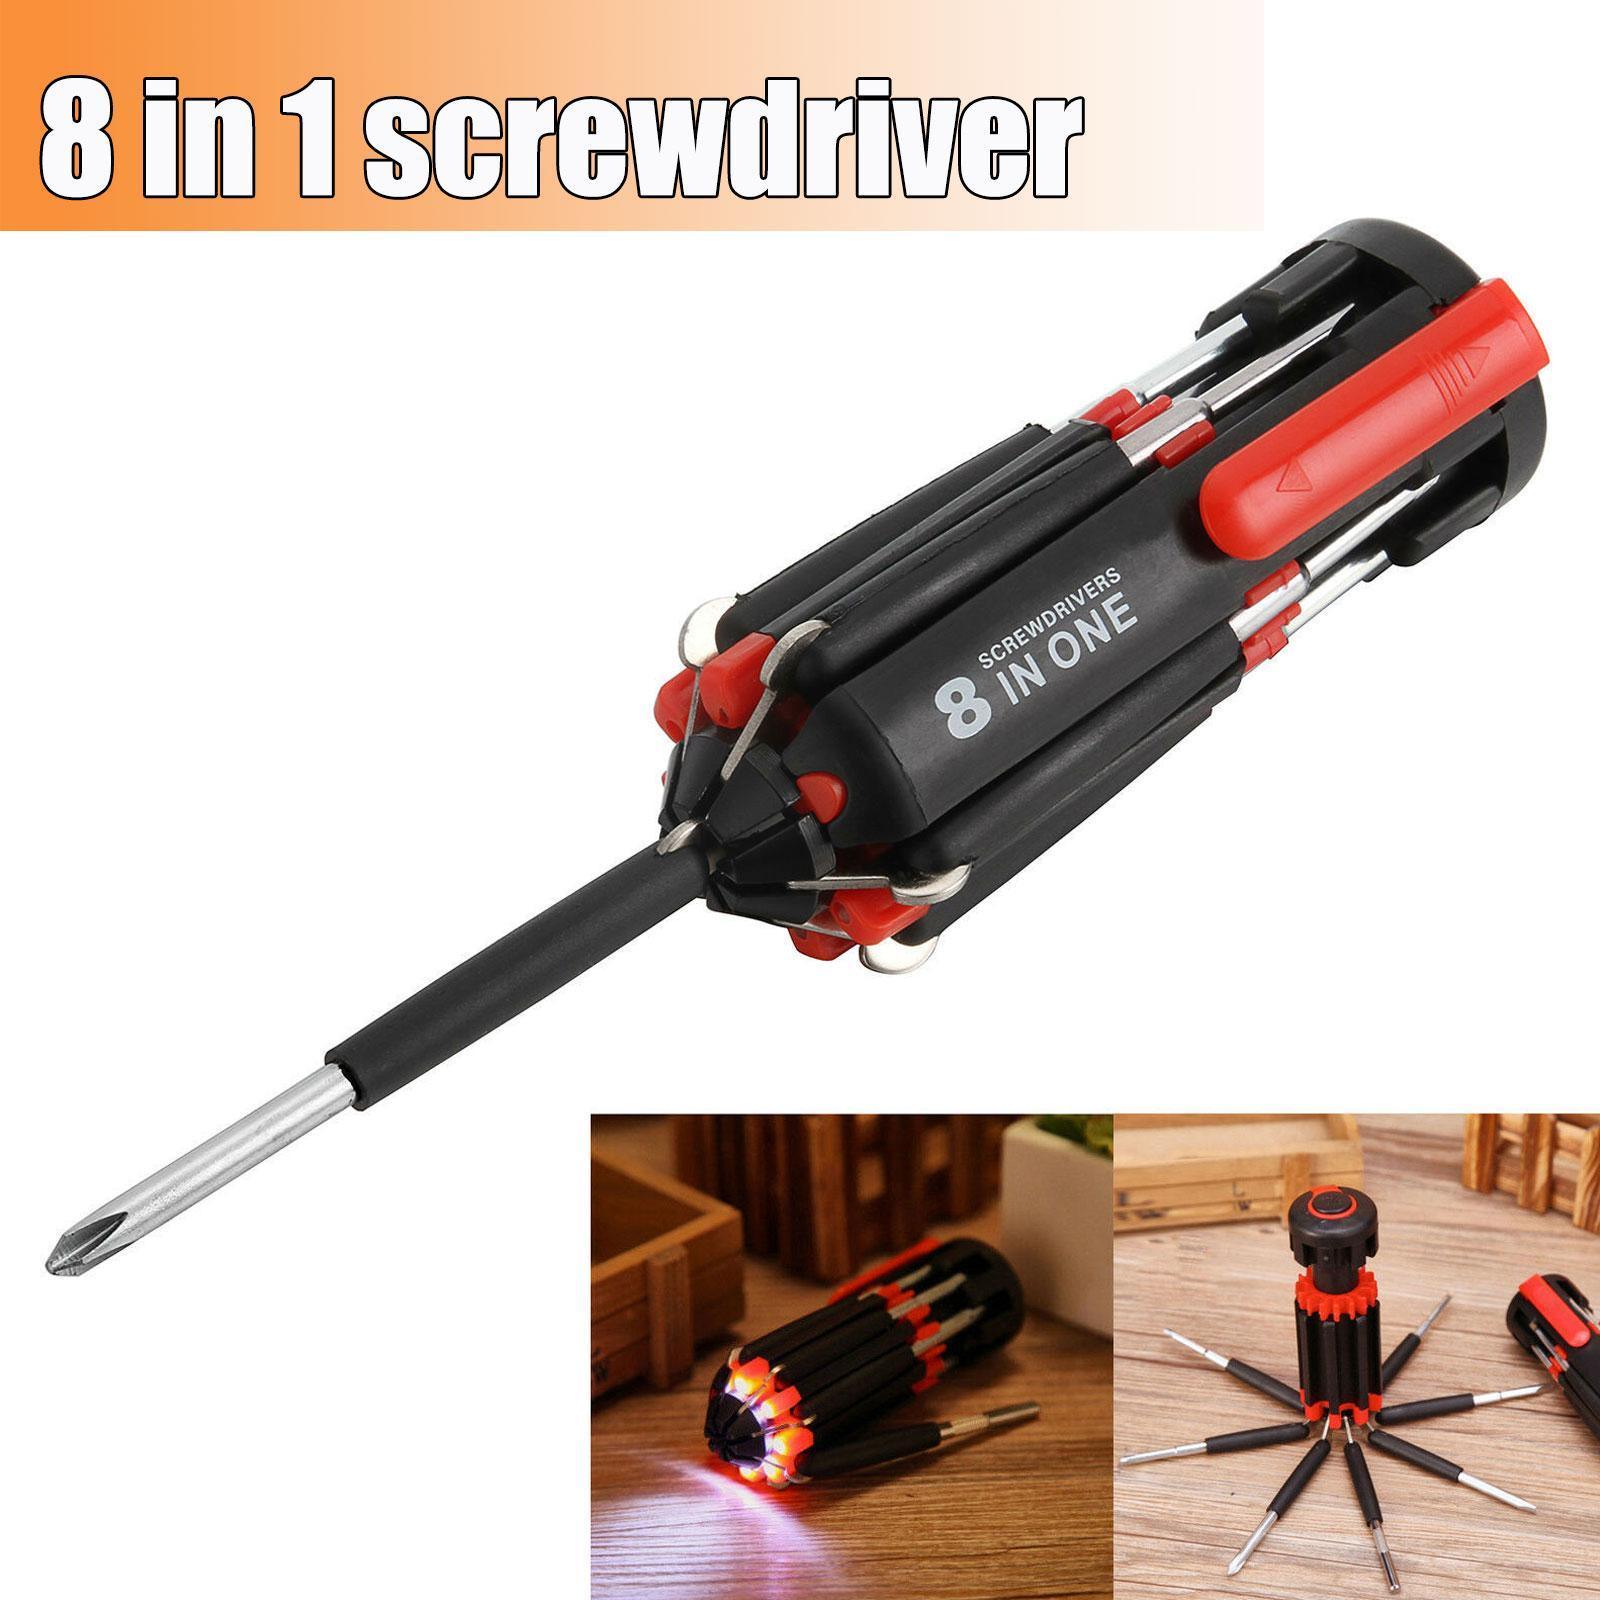 Car Supplies 8 In 1 Screwdriver With LED Flashlight Car Portable Multifunctional Outdoor Tools - Nioor